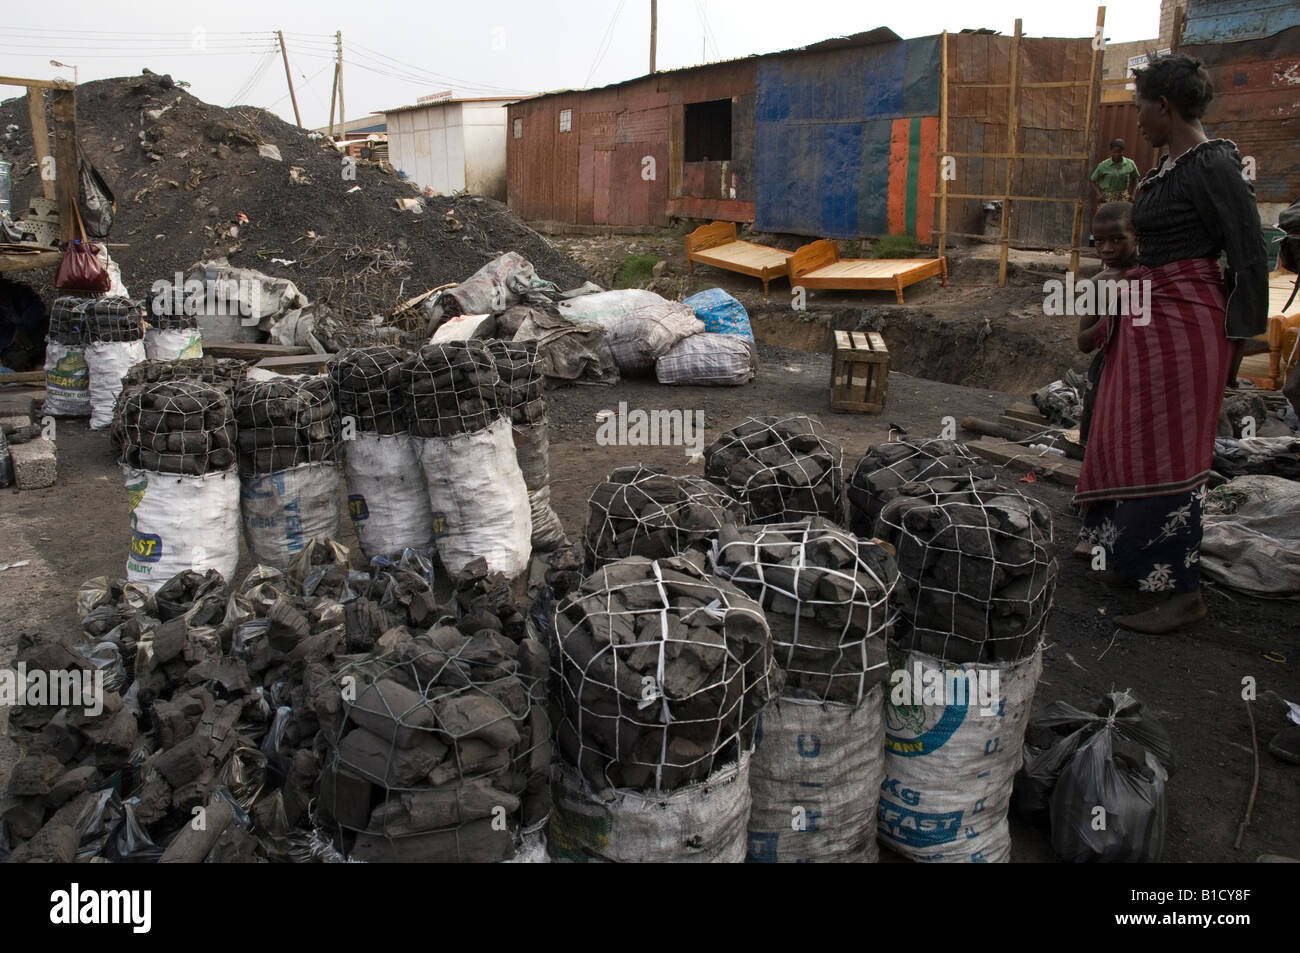 Charcoal packed into bags sold at Kamwala Market in Lusaka, Zambia Stock Photo